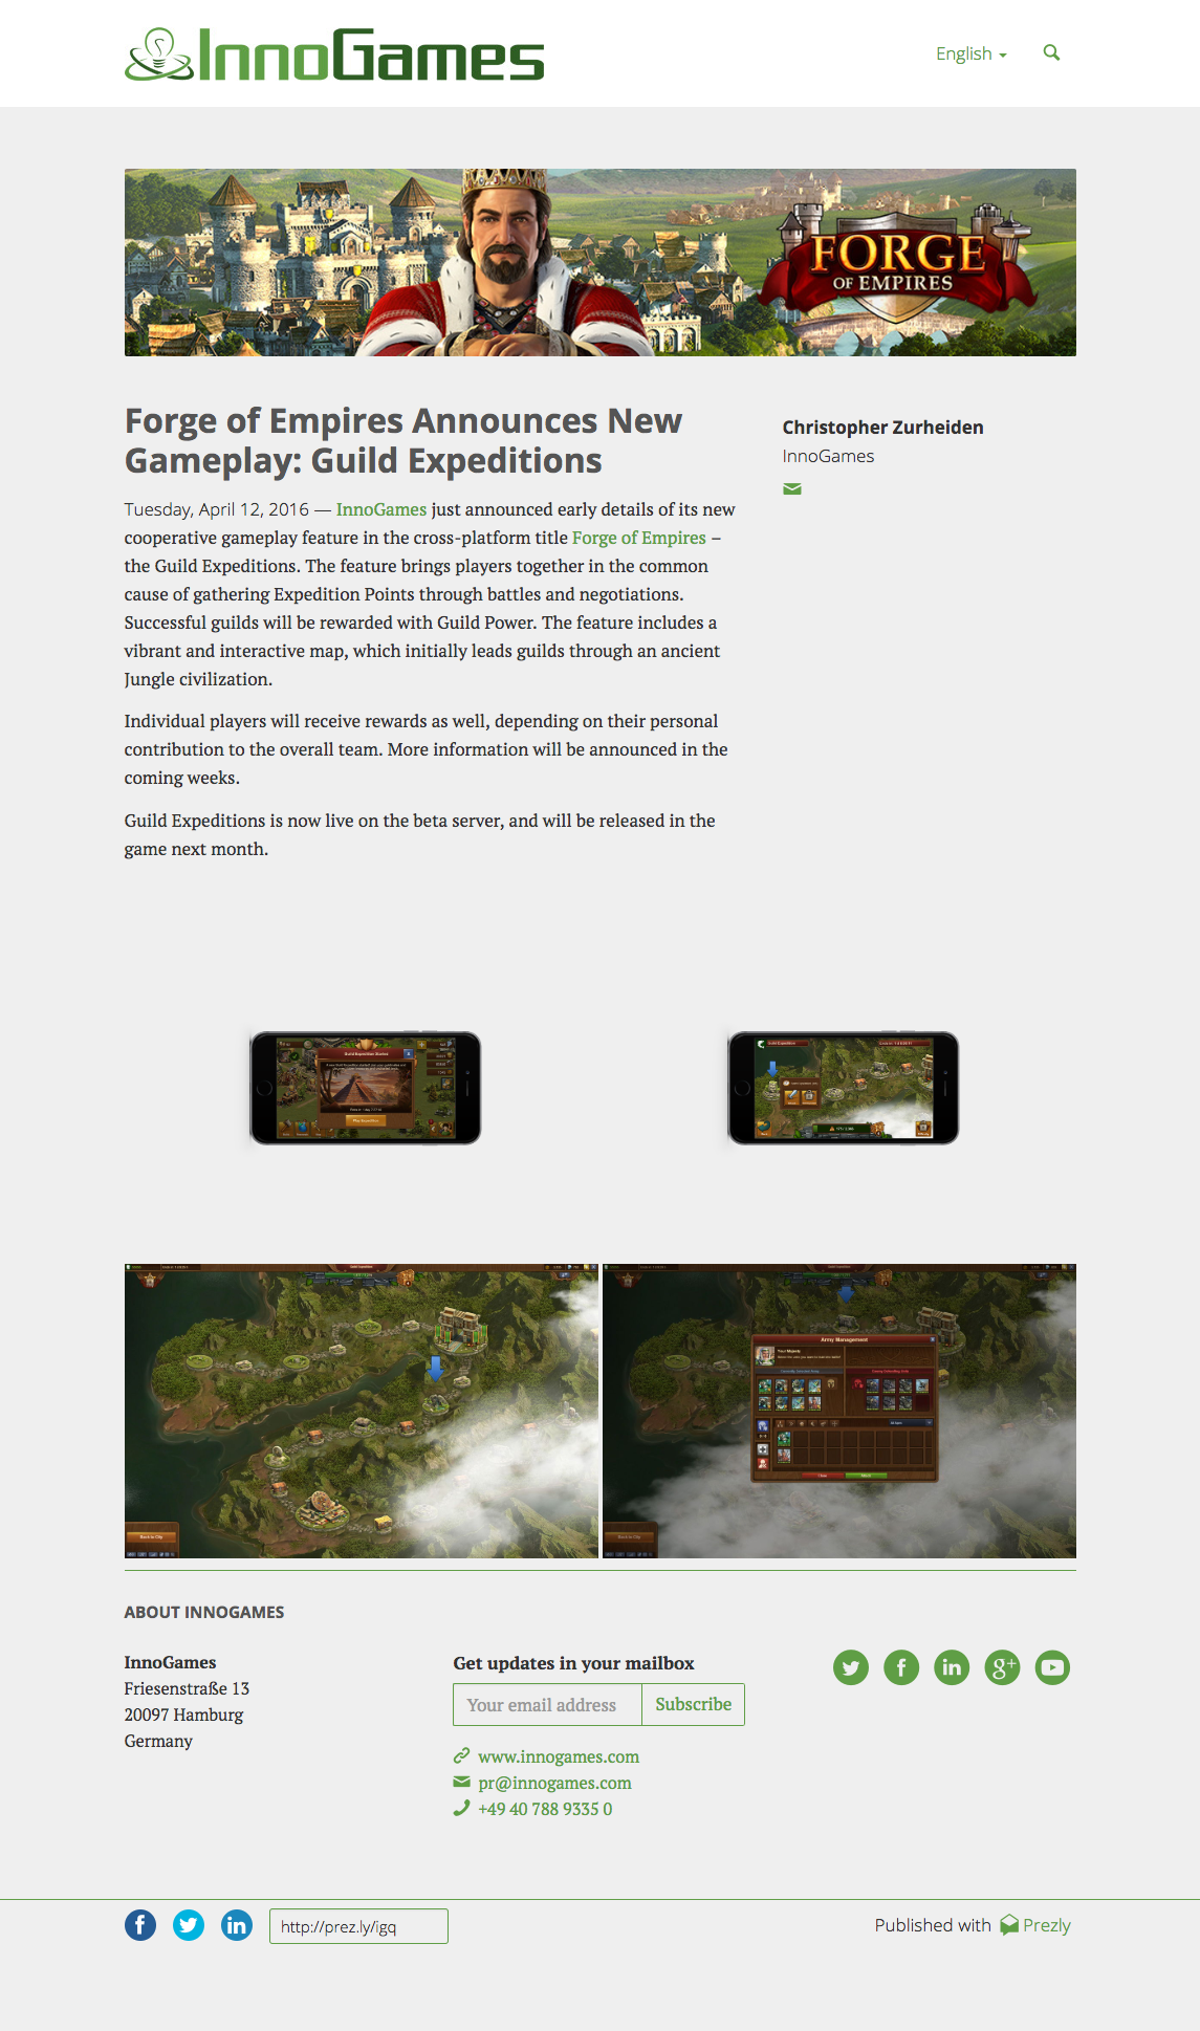 Forge of Empires Announces New Gameplay: Guild Expeditions